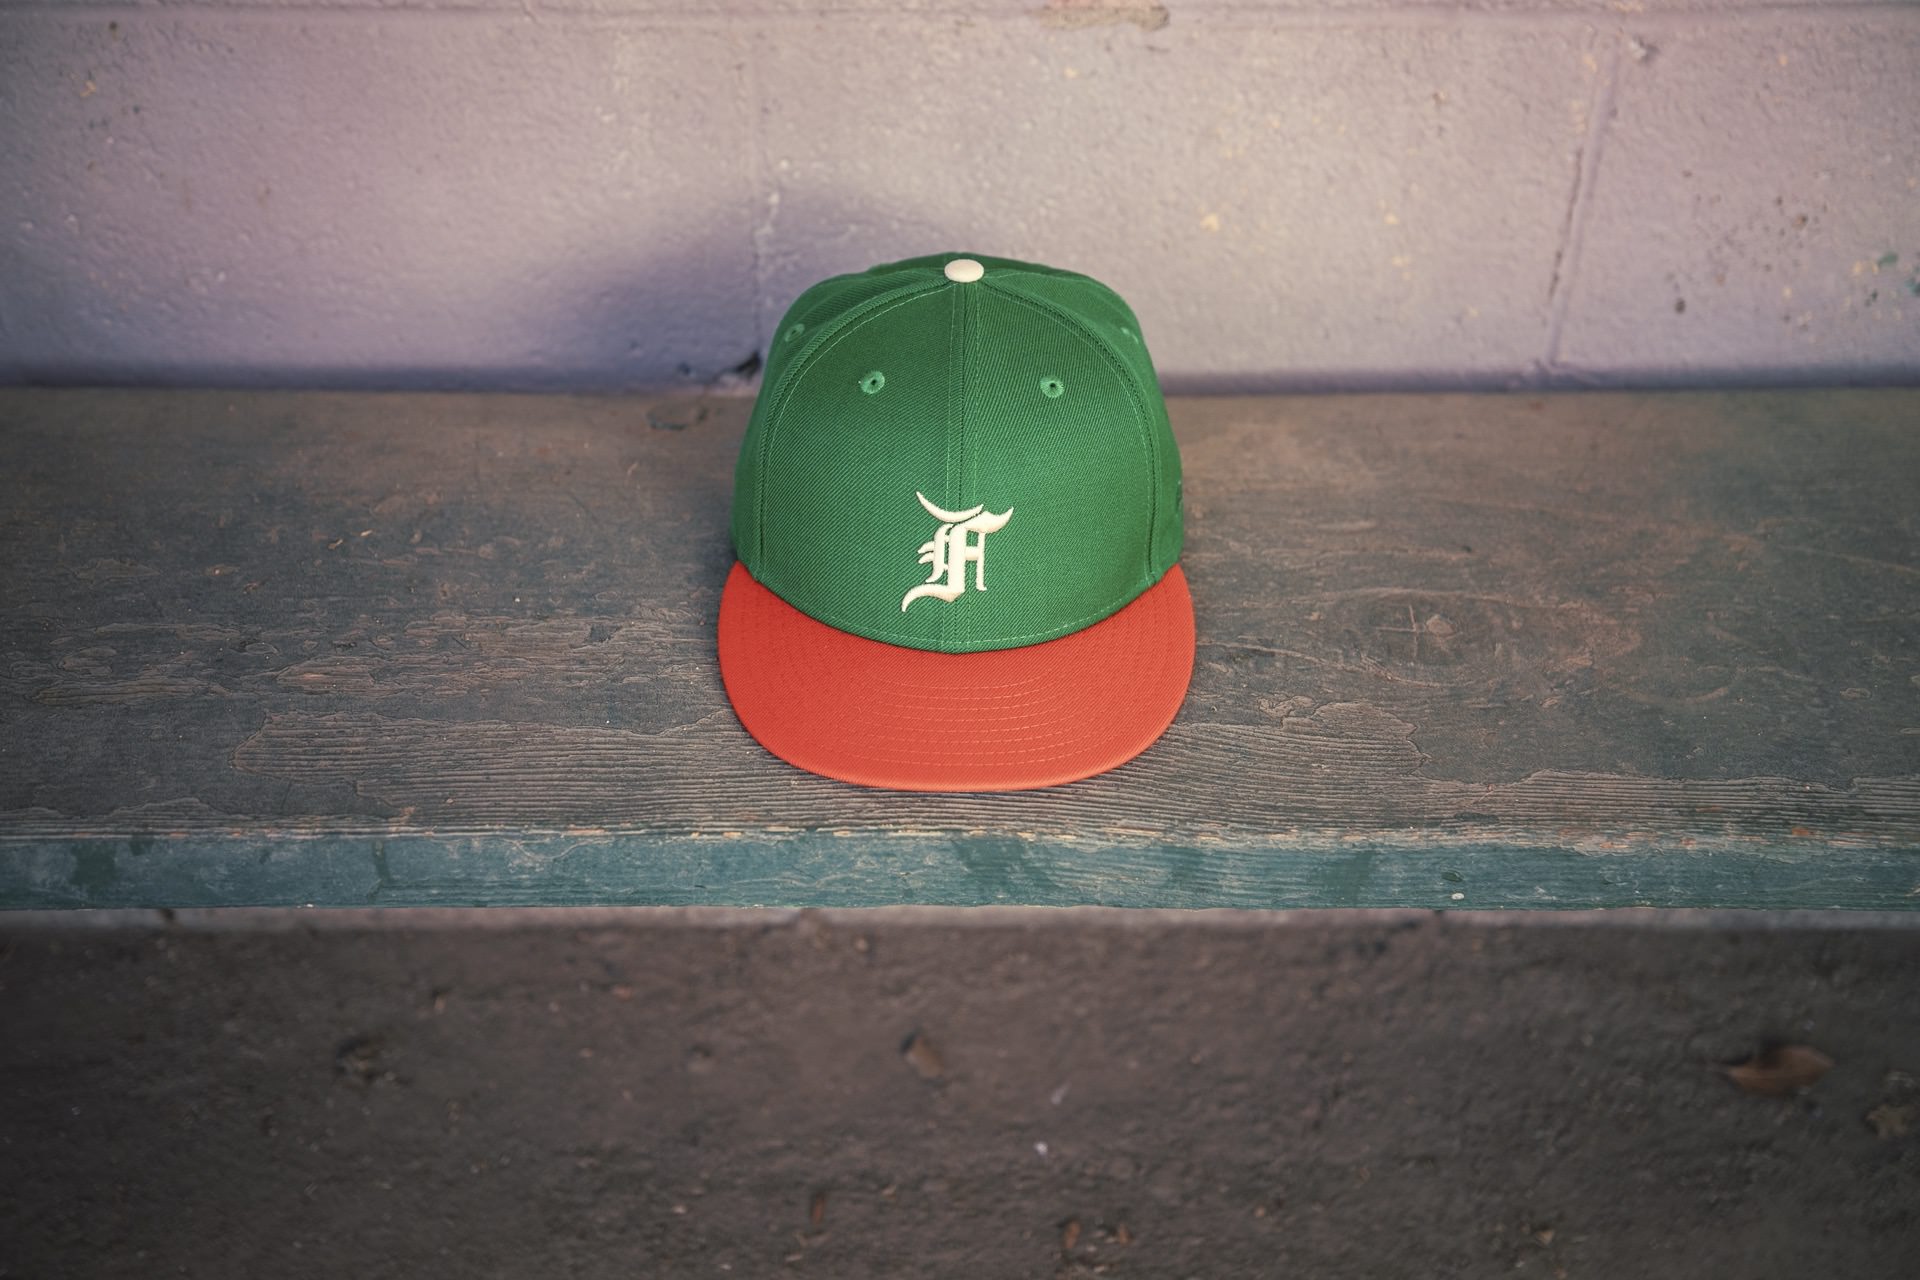 New Era x Fear of God Essential 59FIFTY Kelly Green/Orange Fitted Hat 60185370